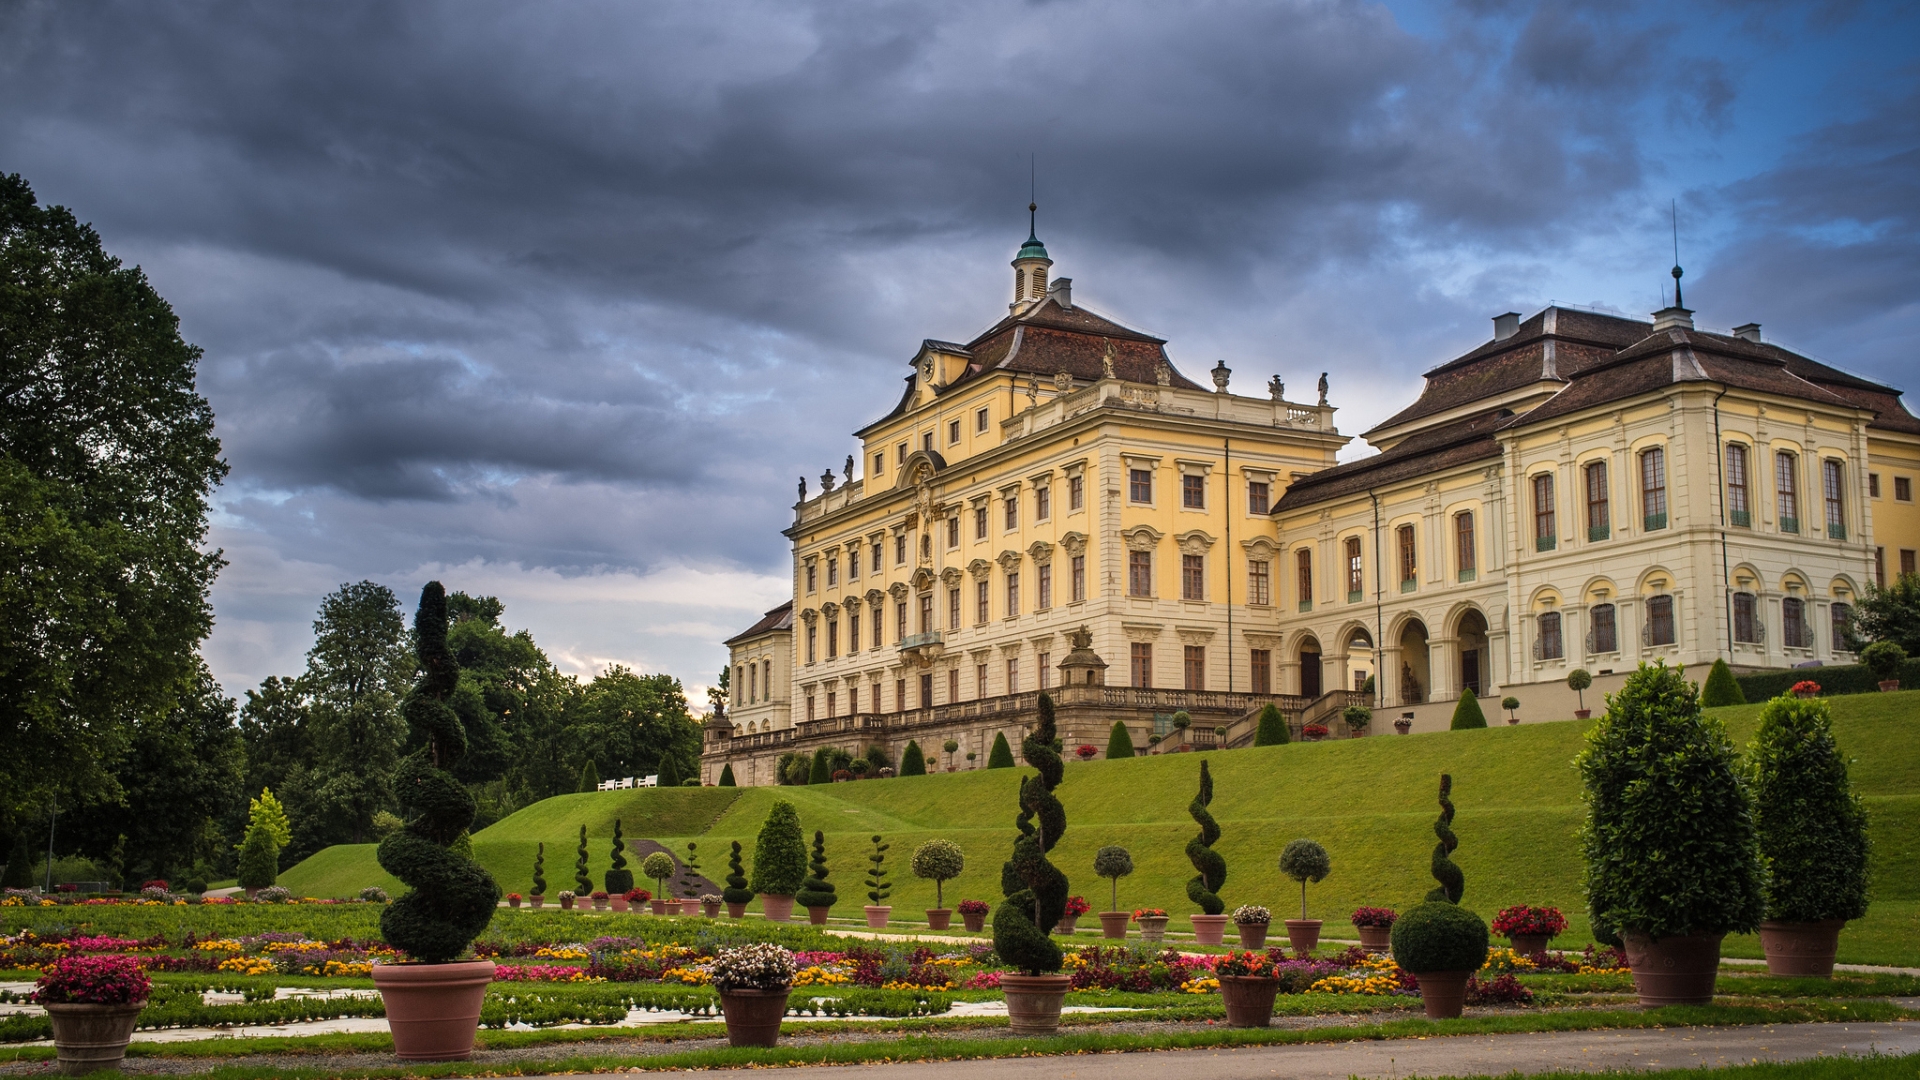 High Resolution Wallpaper | Ludwigsburg Palace 1920x1080 px